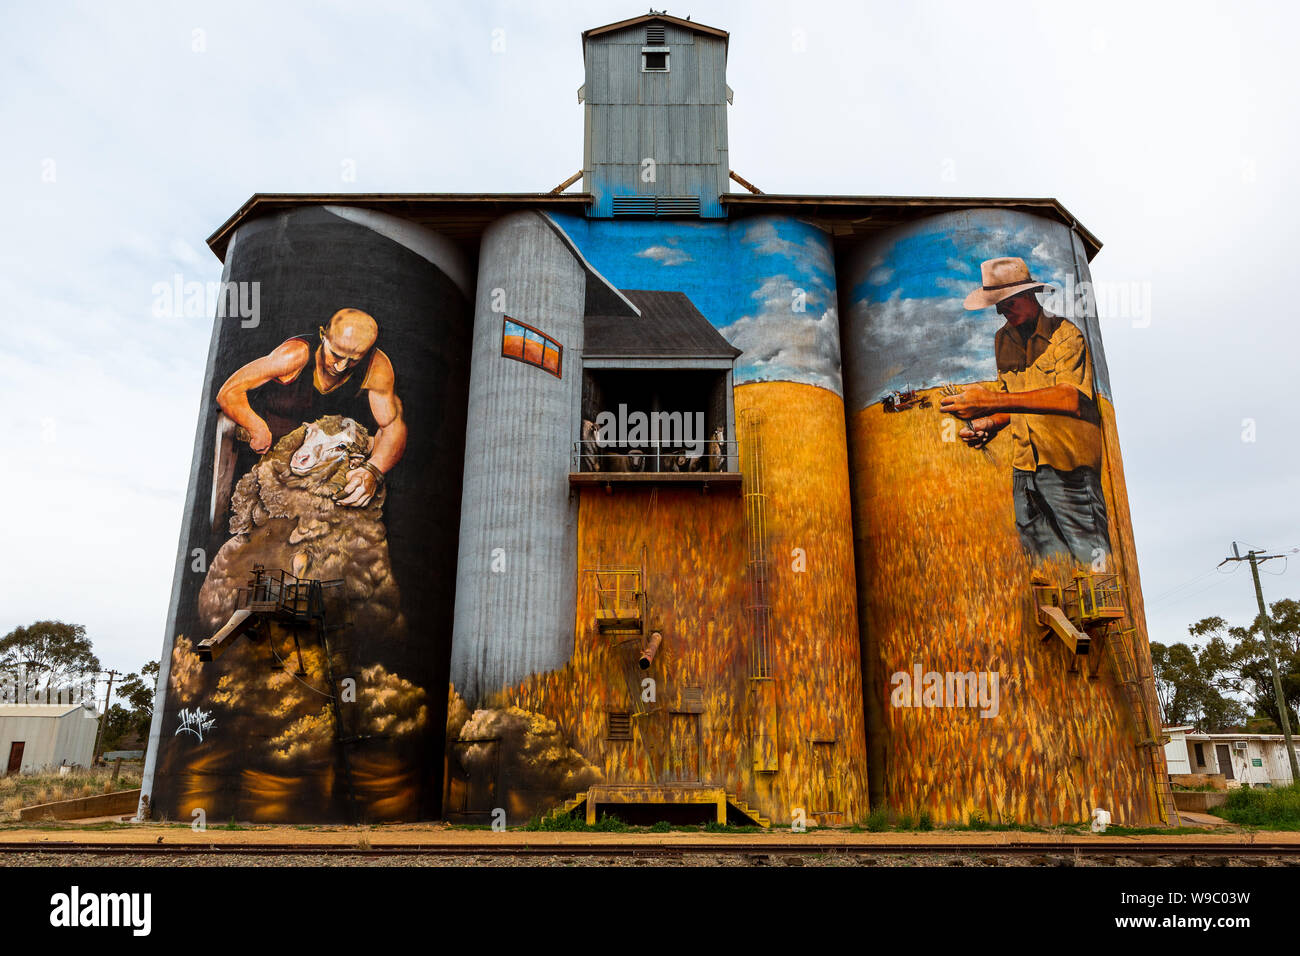 The Weethalle Silo Art project in the Bland Shire Council in NSW Australia taken on 29th July 2019 Stock Photo